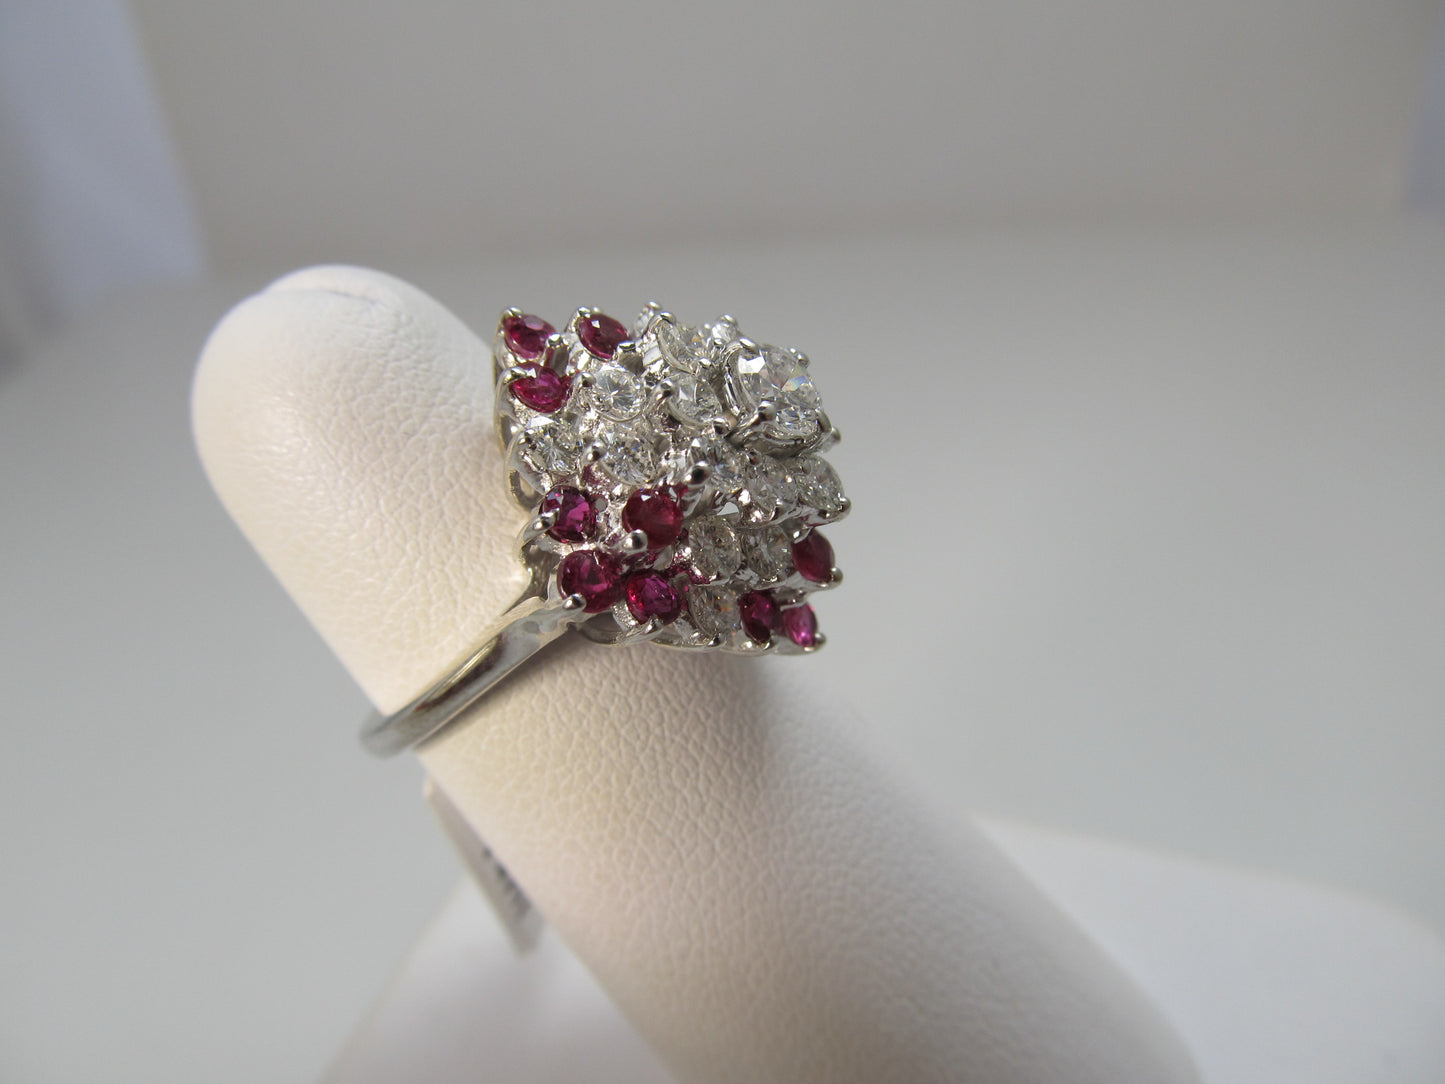 1.25ct diamond and ruby cocktail ring